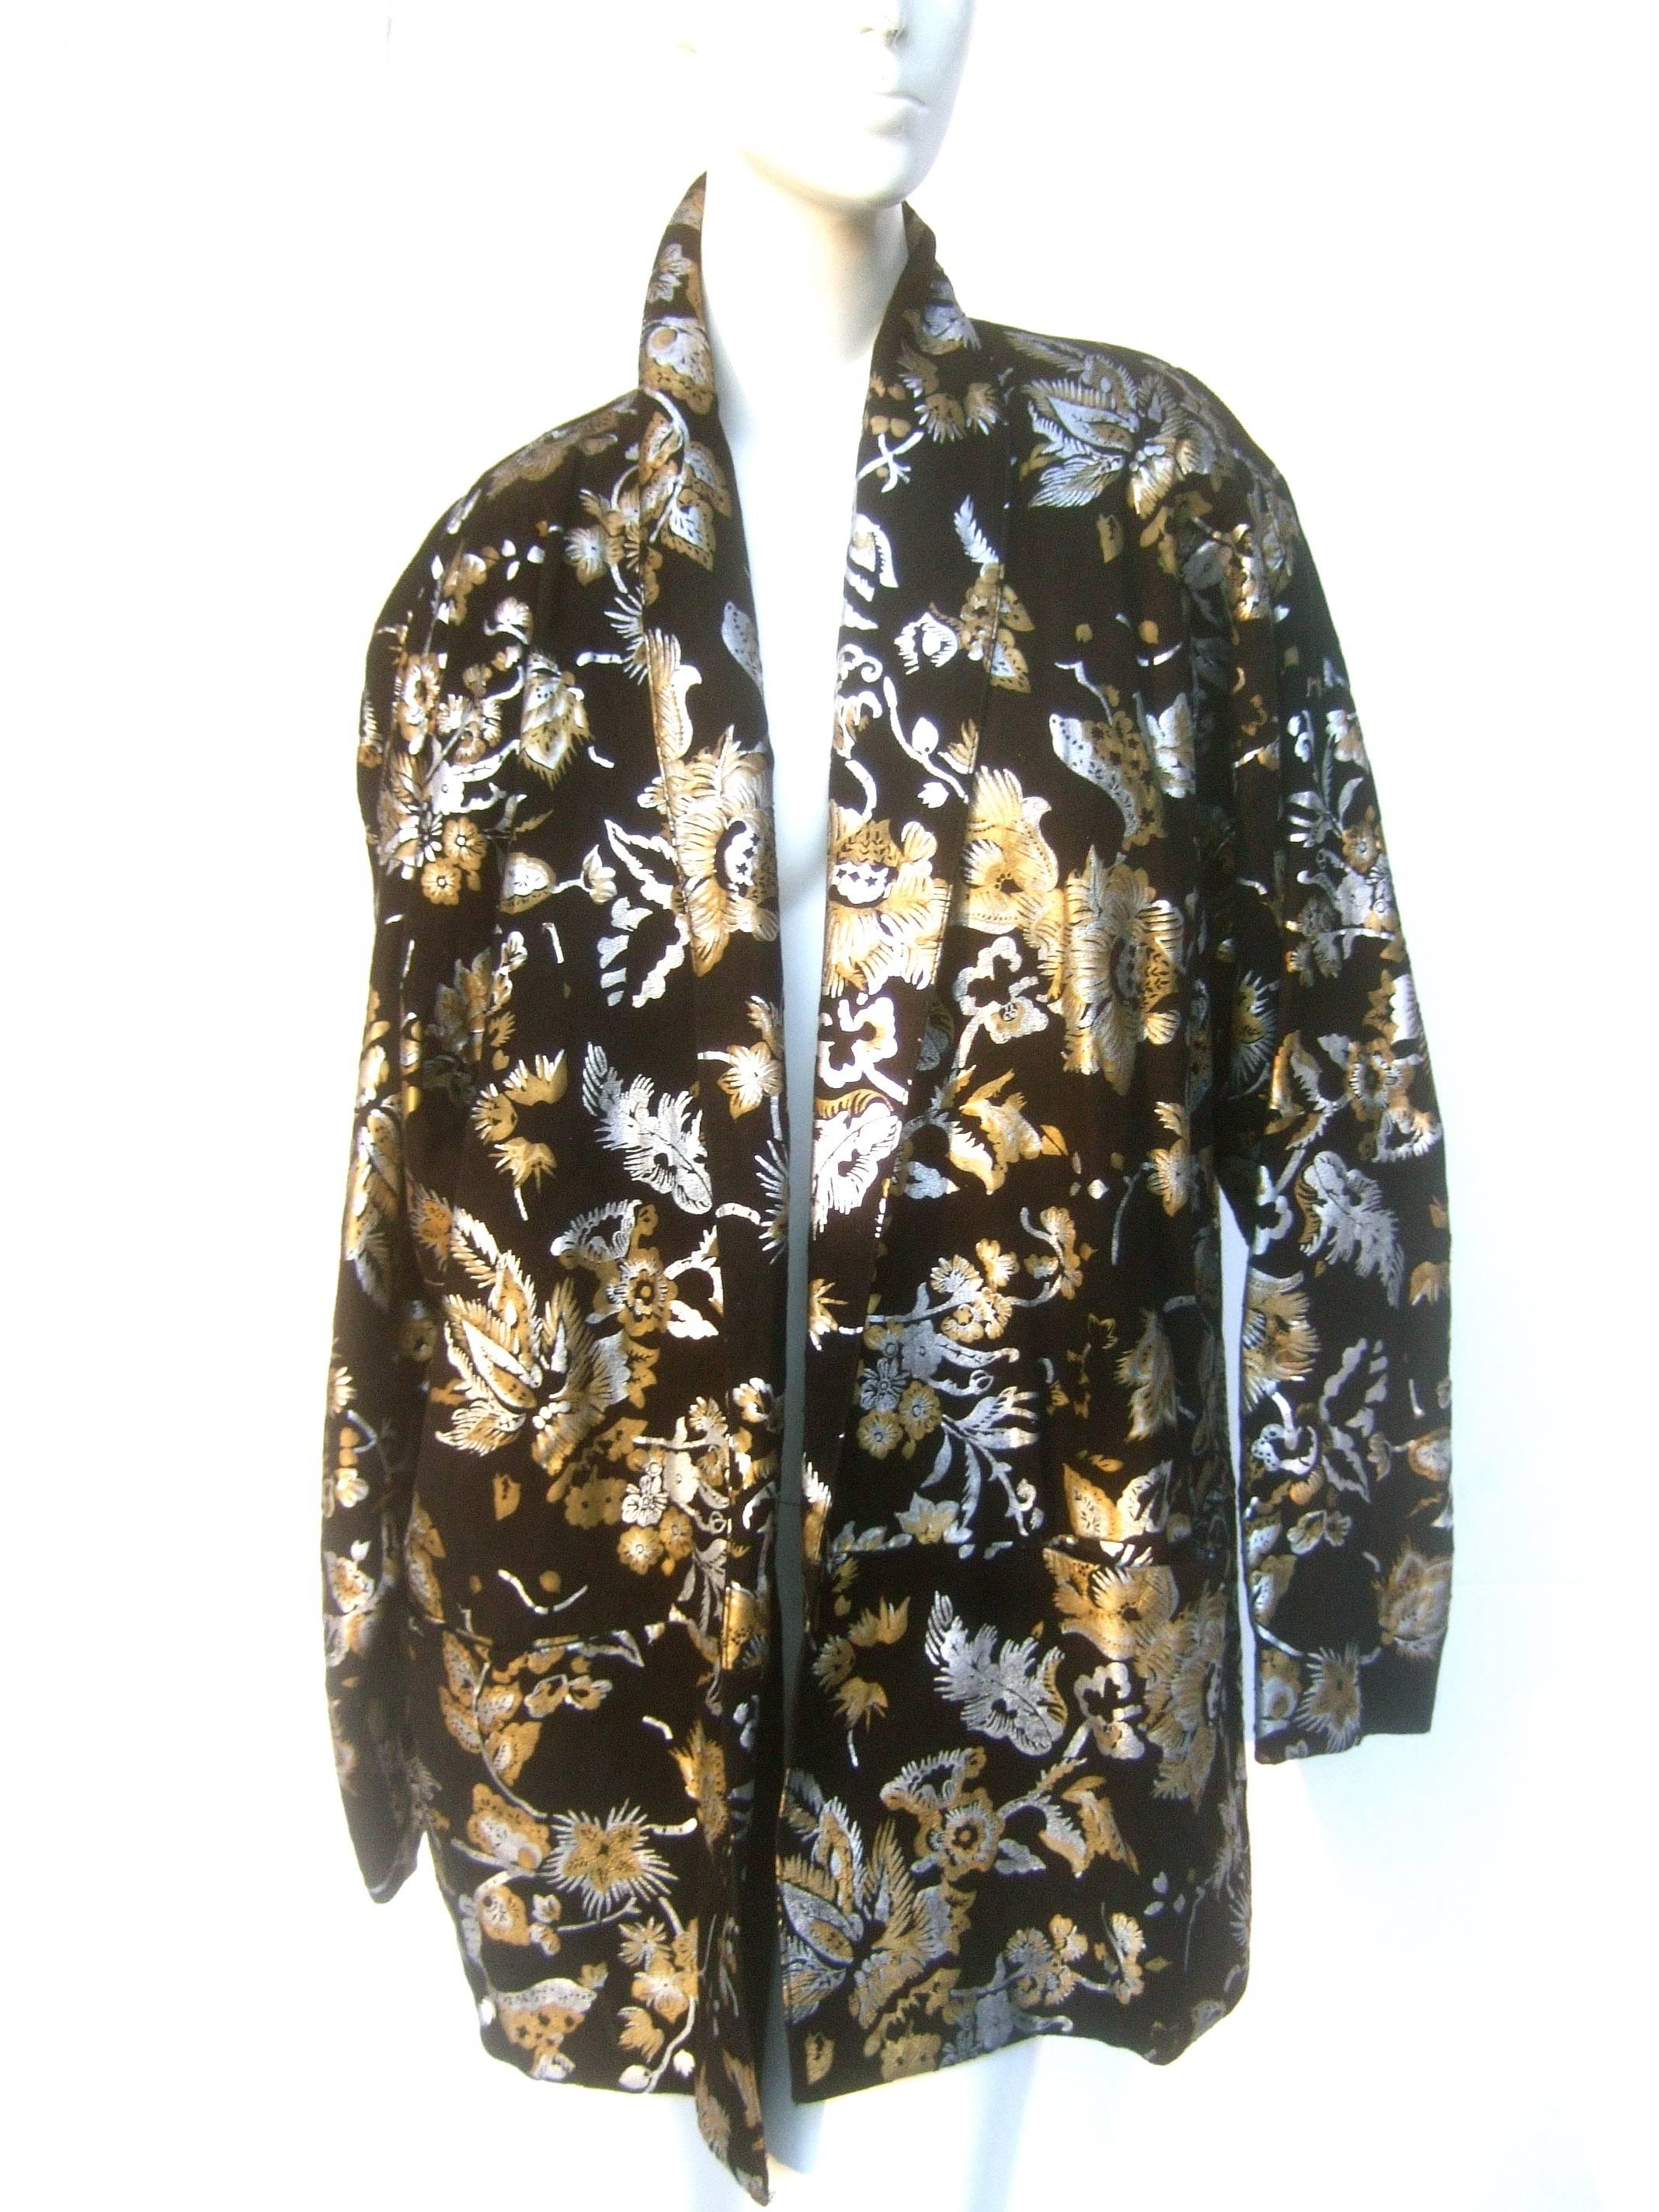 1980s Black suede floral print metallic jacket 
The plush black suede jacket is illuminated 
with a series of vibrant flowers in silver 
and gold metallics

The boxy style jacket is designed with a pair
of deep patch pockets on the lower